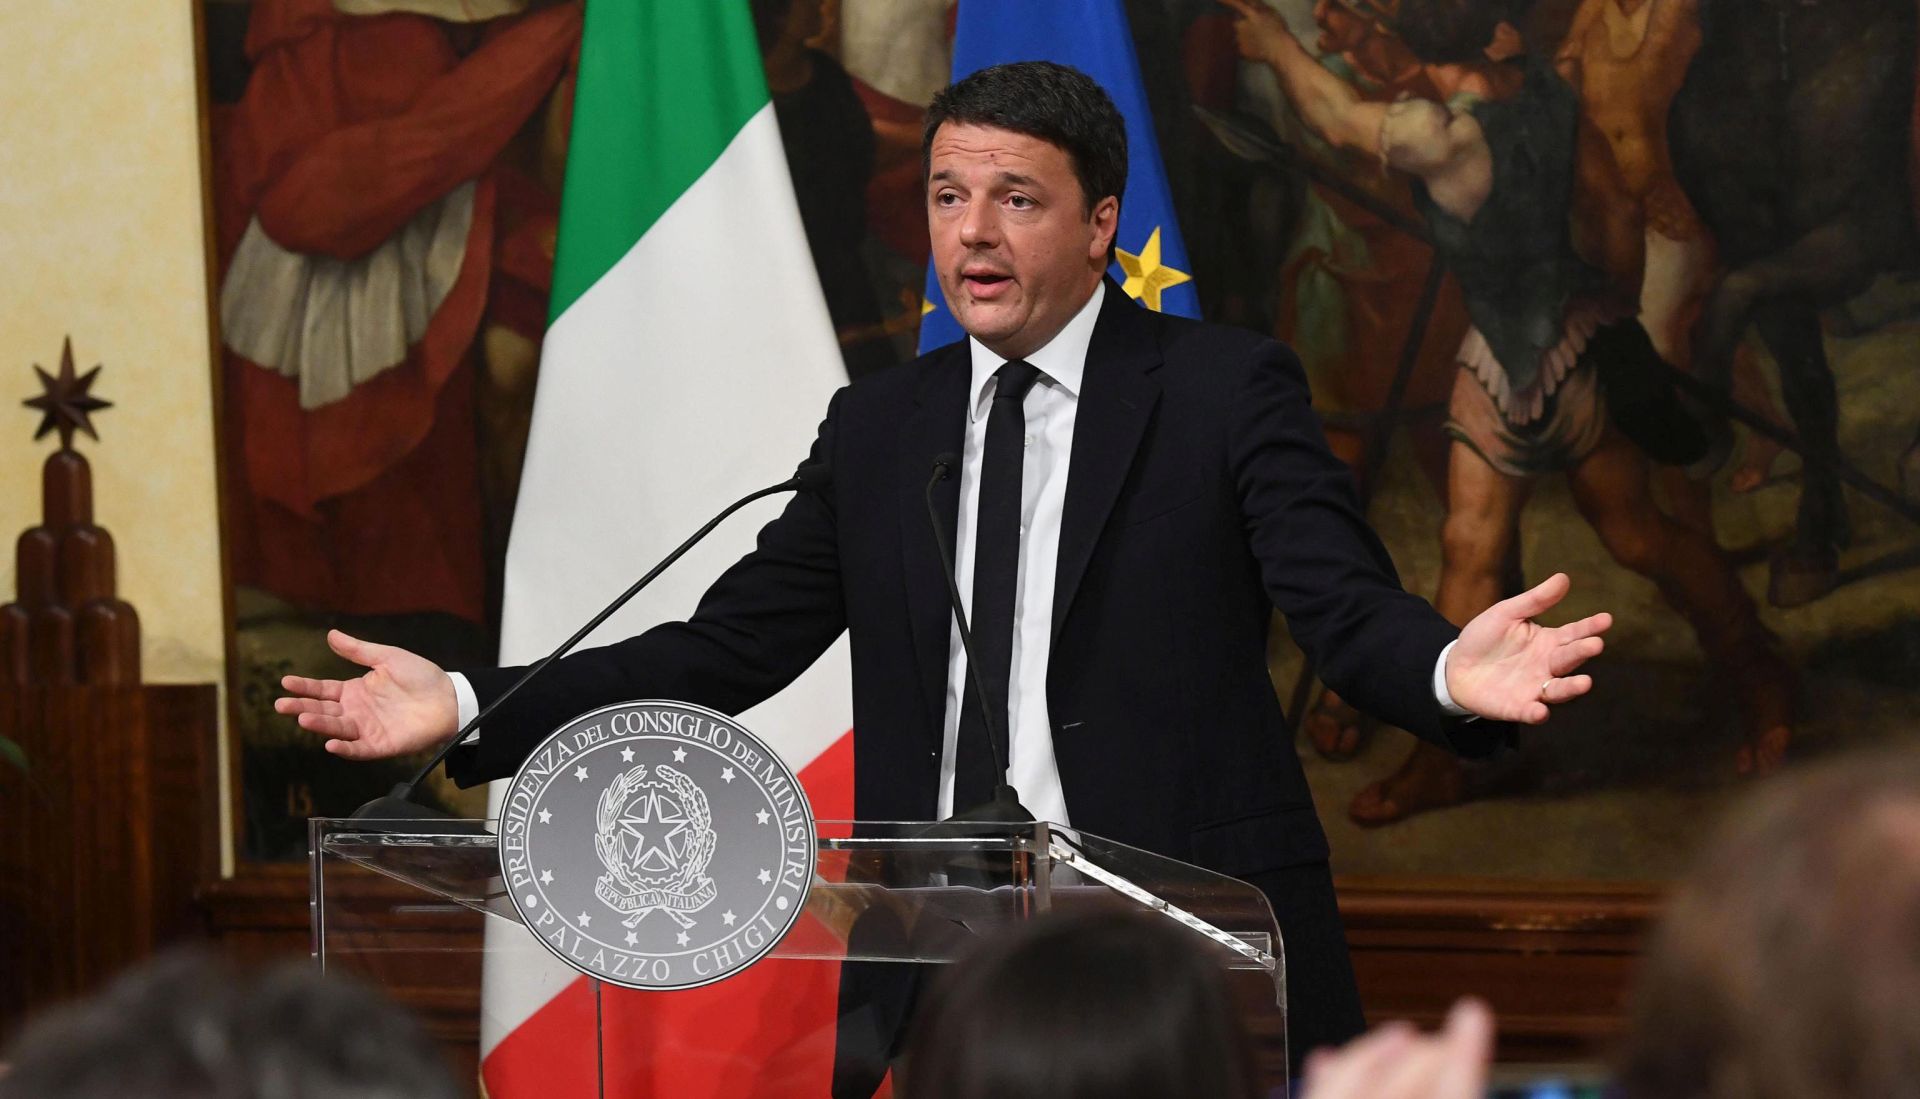 epa05660305 talian Prime Minister Matteo Renzi during a press conference in Rome, Italy, 04 December 2016 after the referendum on constitutional reform, with his wife Angese Landini in the background. Matteo Renzi has announced his resignation after exit polls on 04 December 2016 suggest a 'No' vote victory in a crucial referendum to which Renzi had tied his political future. The referendum is considered by the government to end gridlock and make passing legislation cheaper by, among other things, turning the Senate into a leaner body made up of regional representatives with fewer lawmaking powers. It would also do away with the equal powers between the Upper and Lower Houses of parliament - an unusual system that has been blamed for decades of political gridlock.  EPA/ALESSANDRO DI MEO